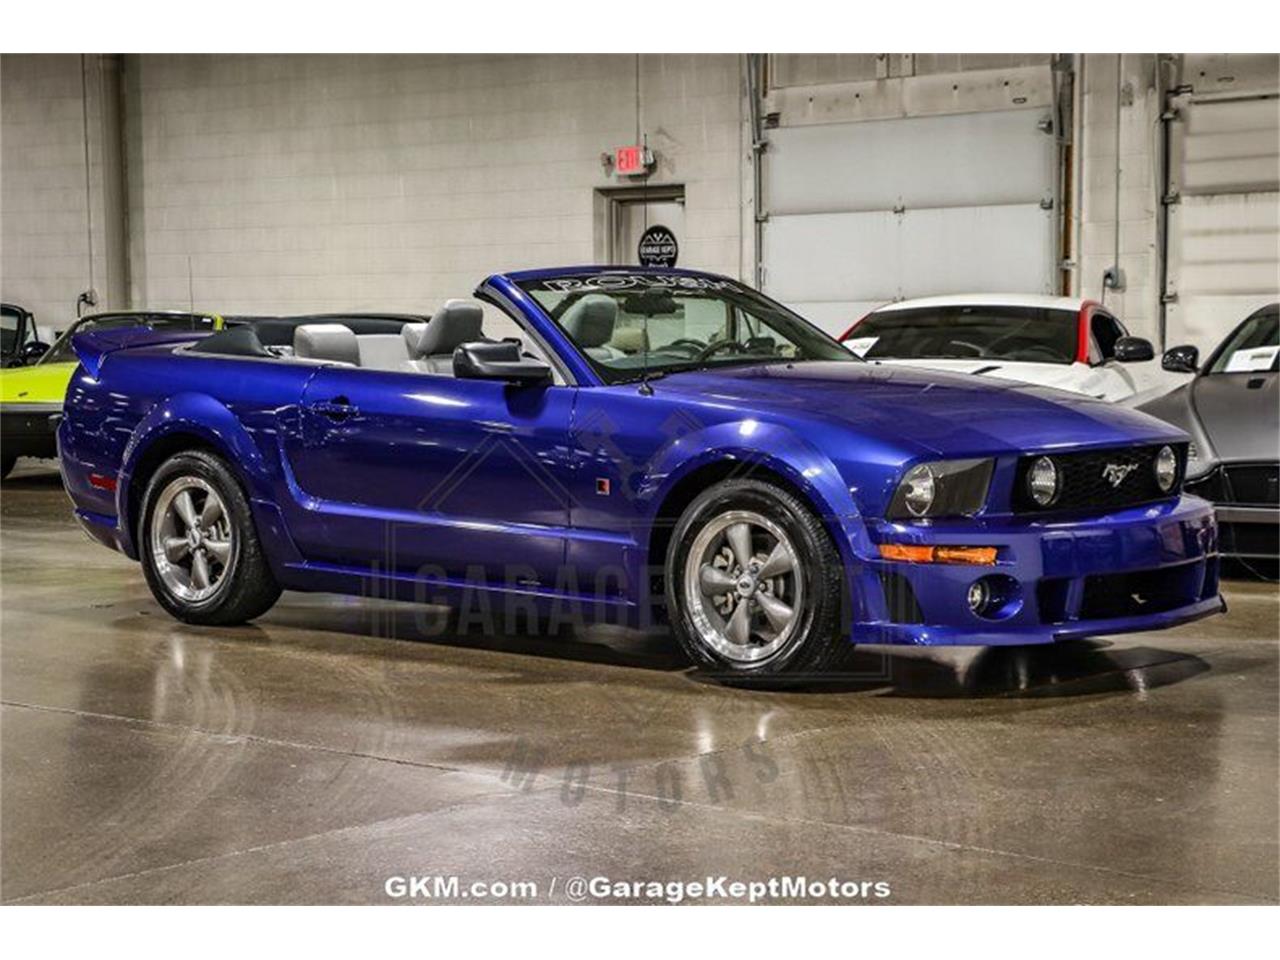 For Sale: 2005 Ford Mustang in Grand Rapids, Michigan for sale in Grand Rapids, MI